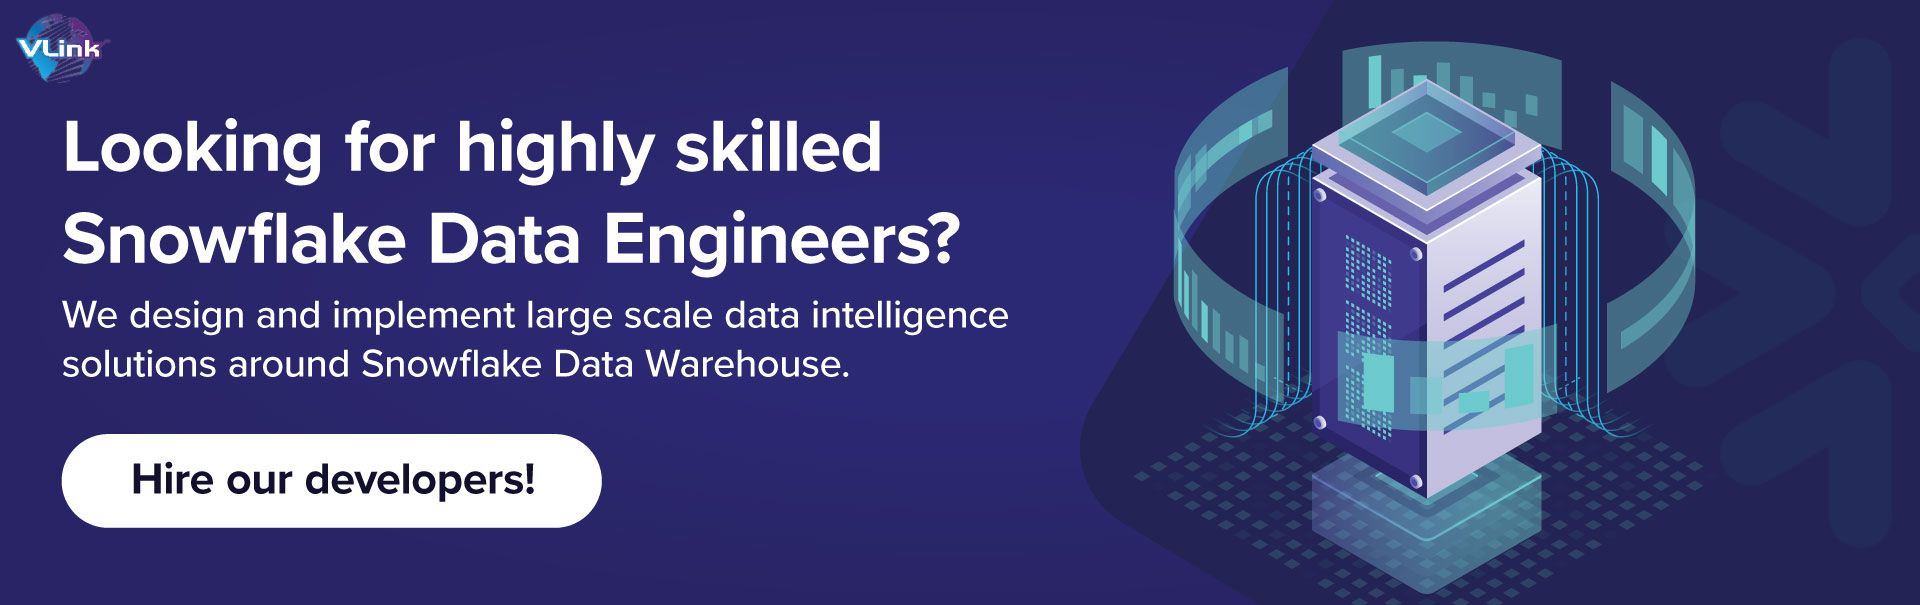 Looking for highly skilled snowflake data engineers